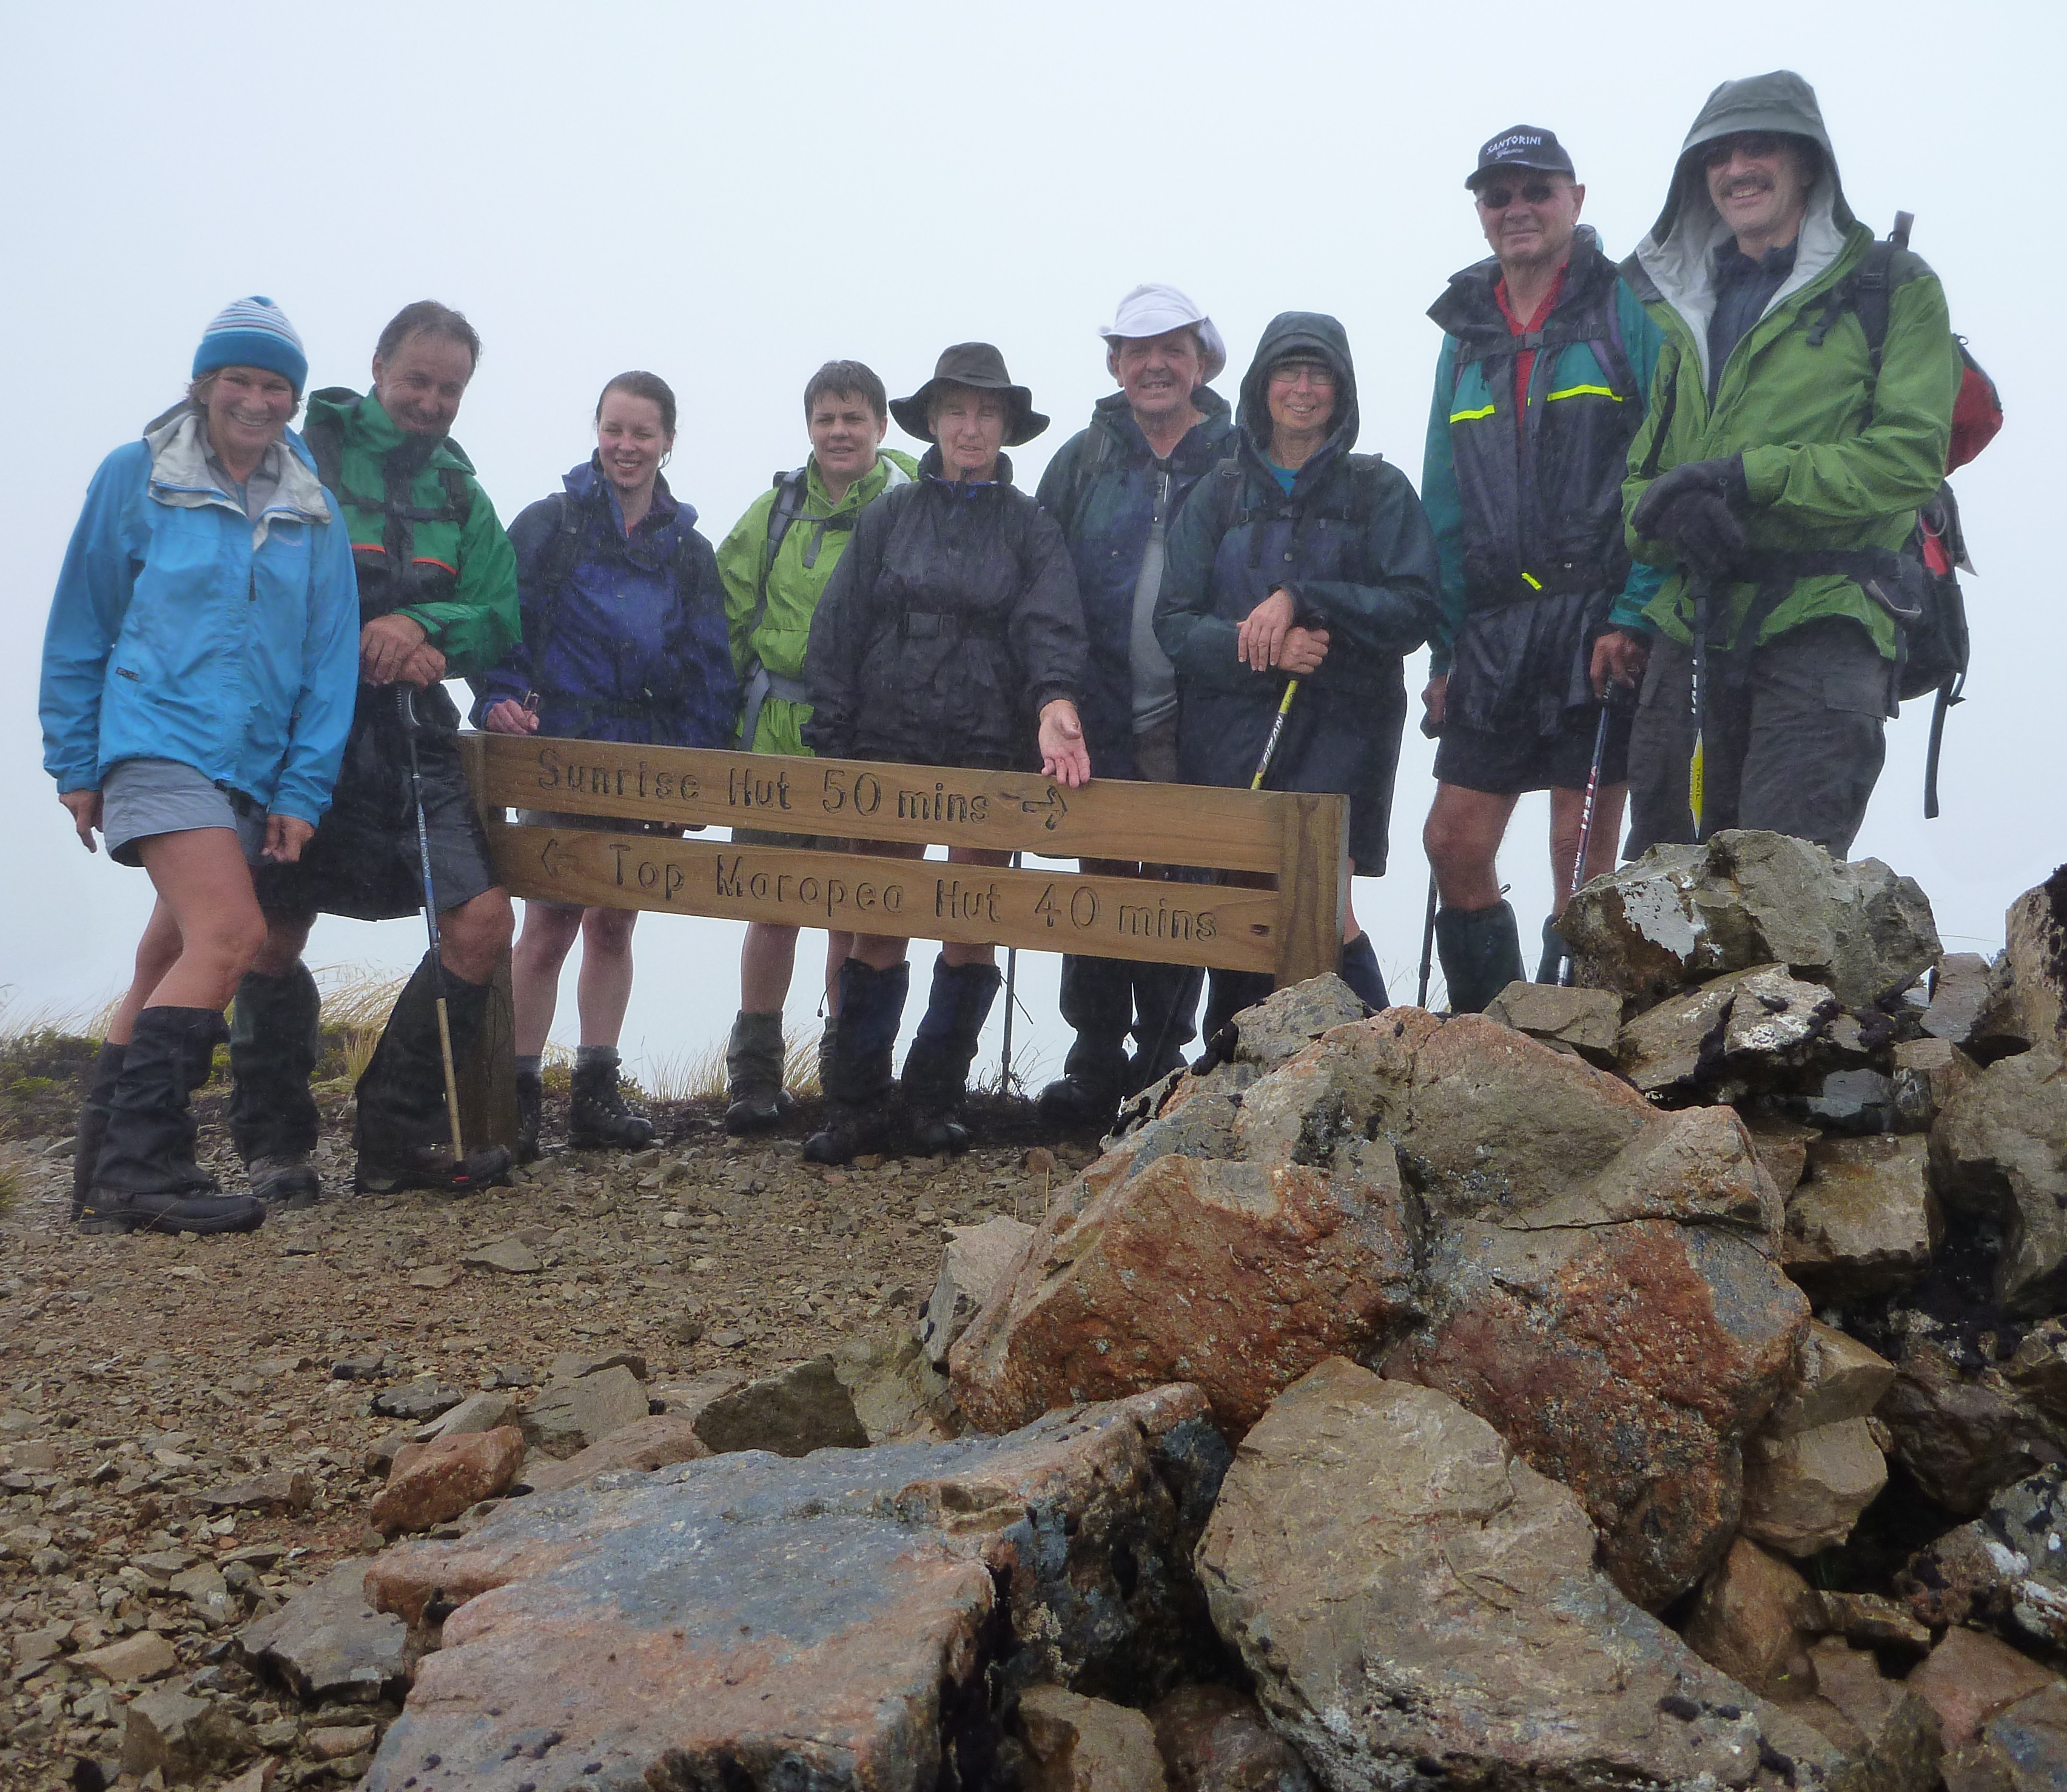 The wet but still smiling trampers to Top Maropea Hut